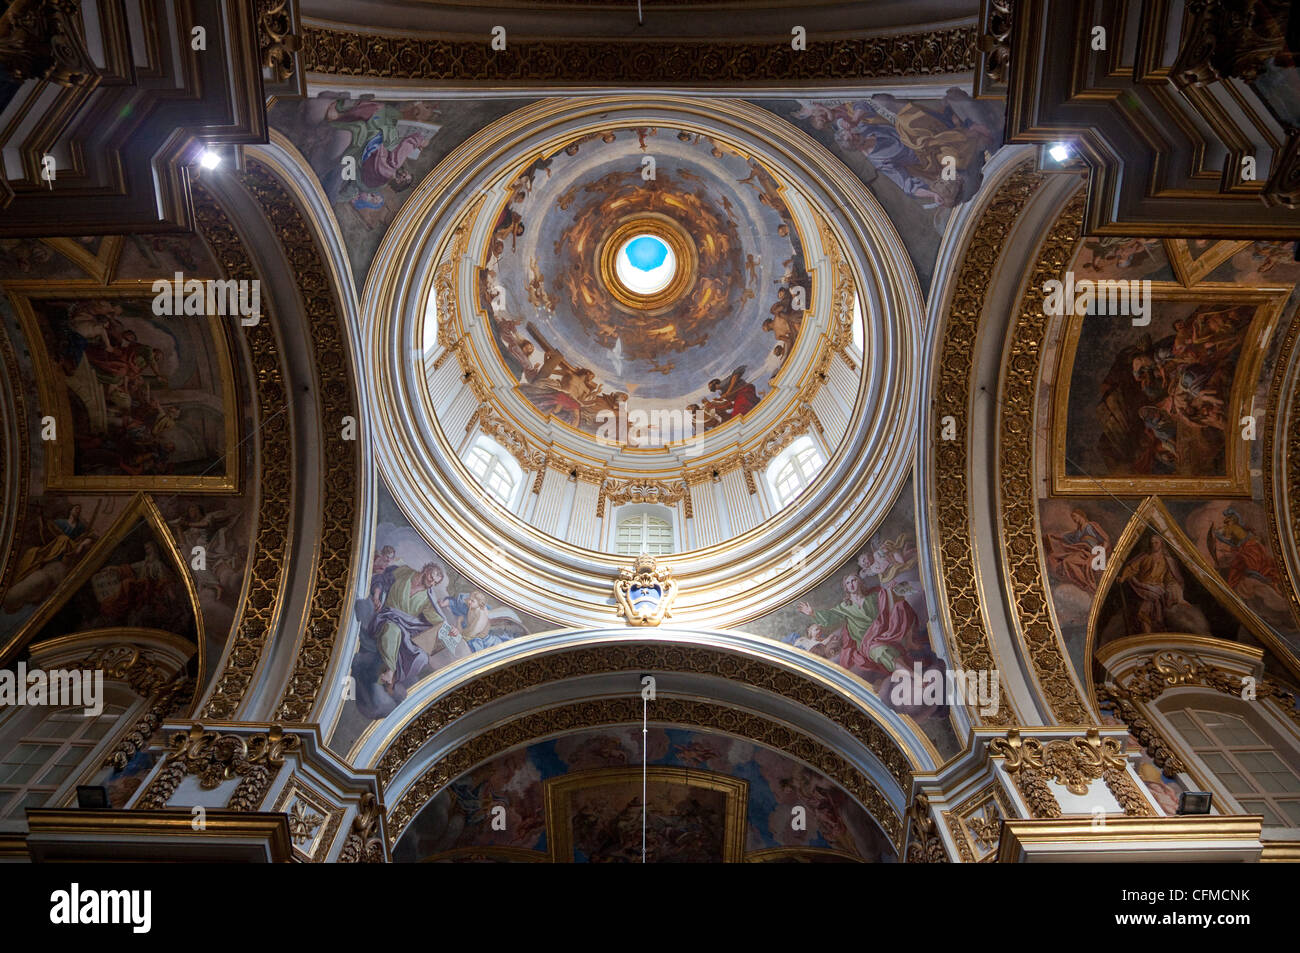 Interior of dome, St. Paul's Cathedral, Mdina, Malta, Europe Stock Photo